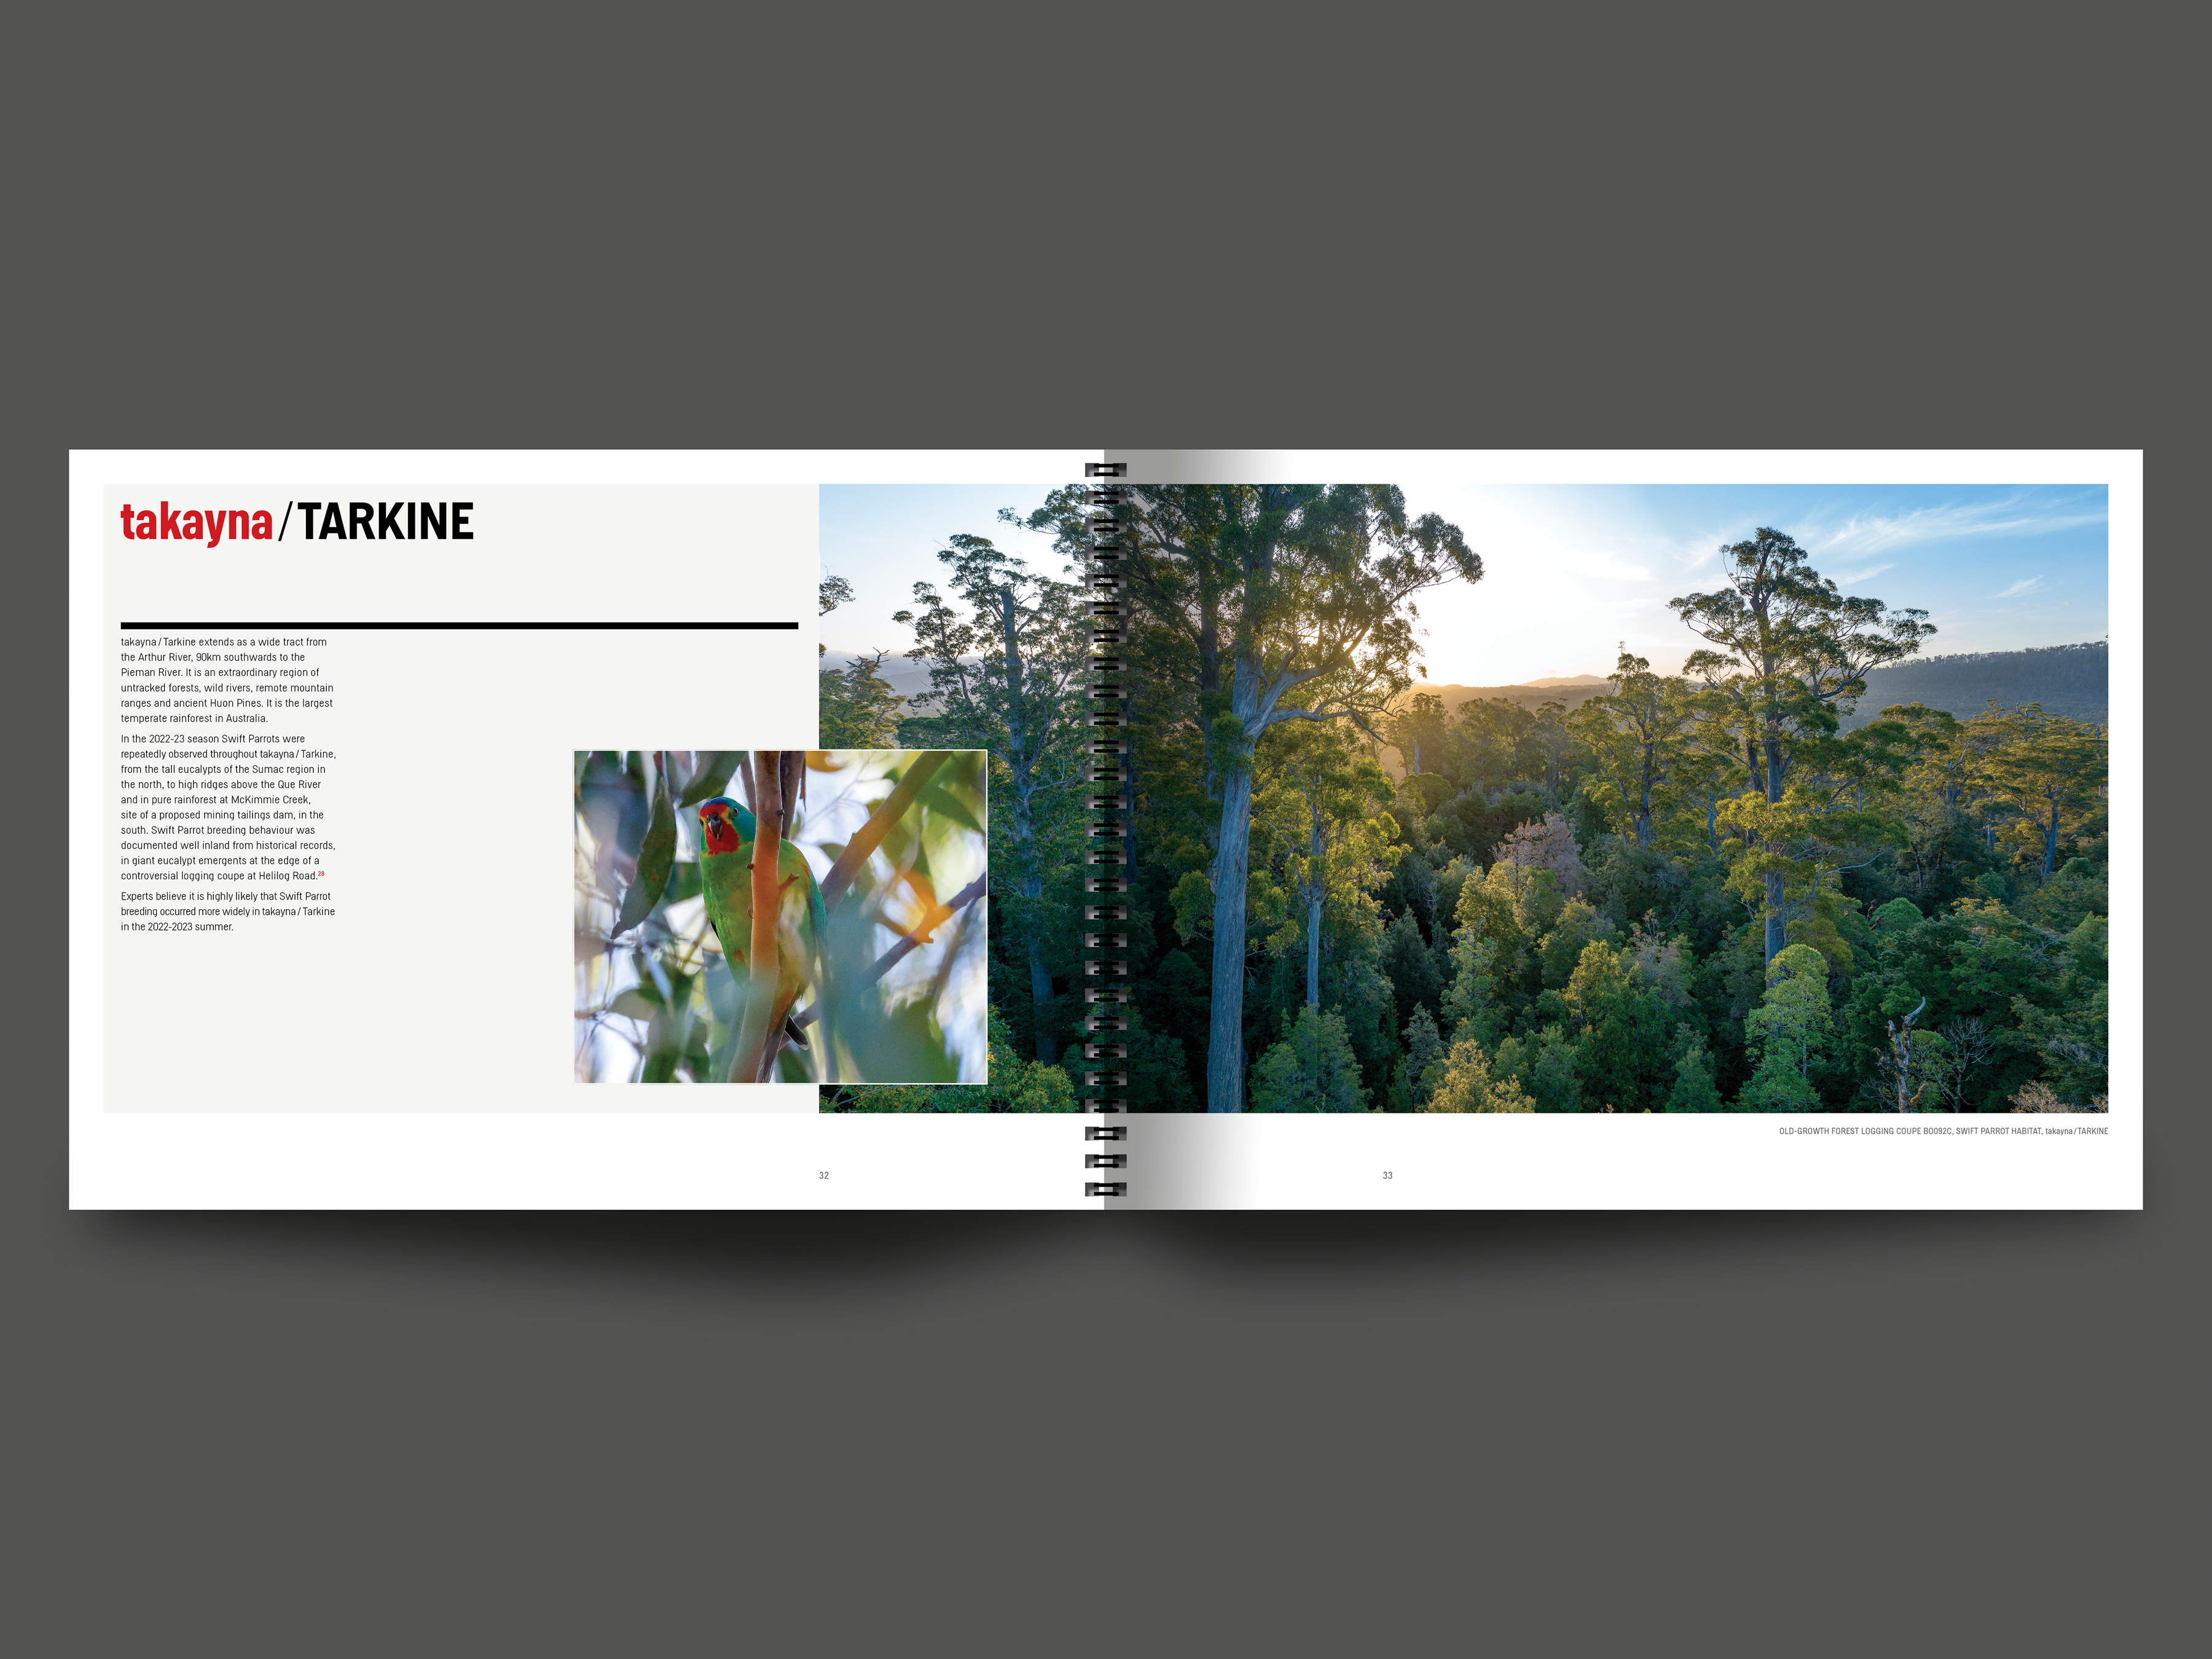 A double page spread from the book featuring text about takayna / Tarkine on the left with a small inset image of a Swift Parrot perching amongst eucalyptus trees, and a full page image of Swift Parrot forest habitat in takayna / Tarkine on the right. Images by Rob Blakers.